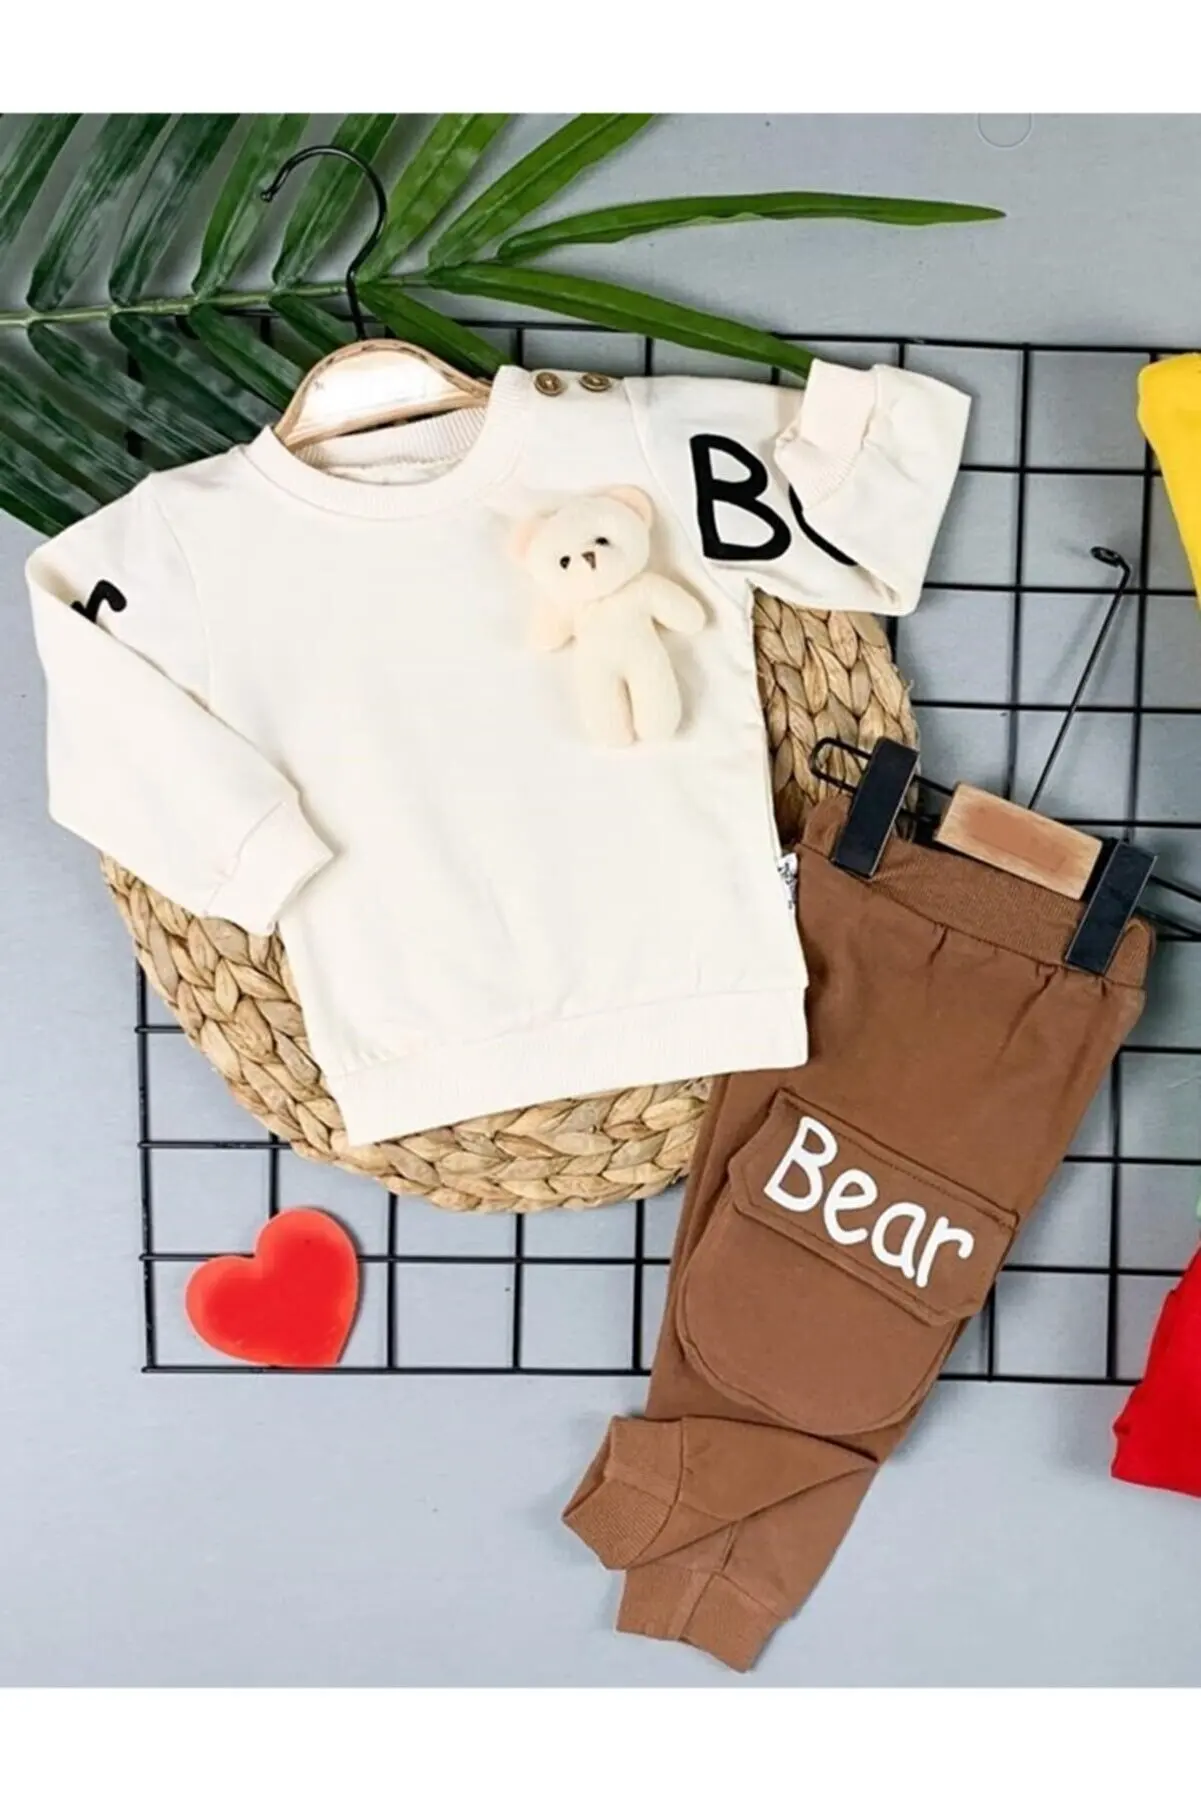 100 cotton Baby rompers girls boys clothes clothing sets summer seasonal sweater newborn romper cute costume toddler